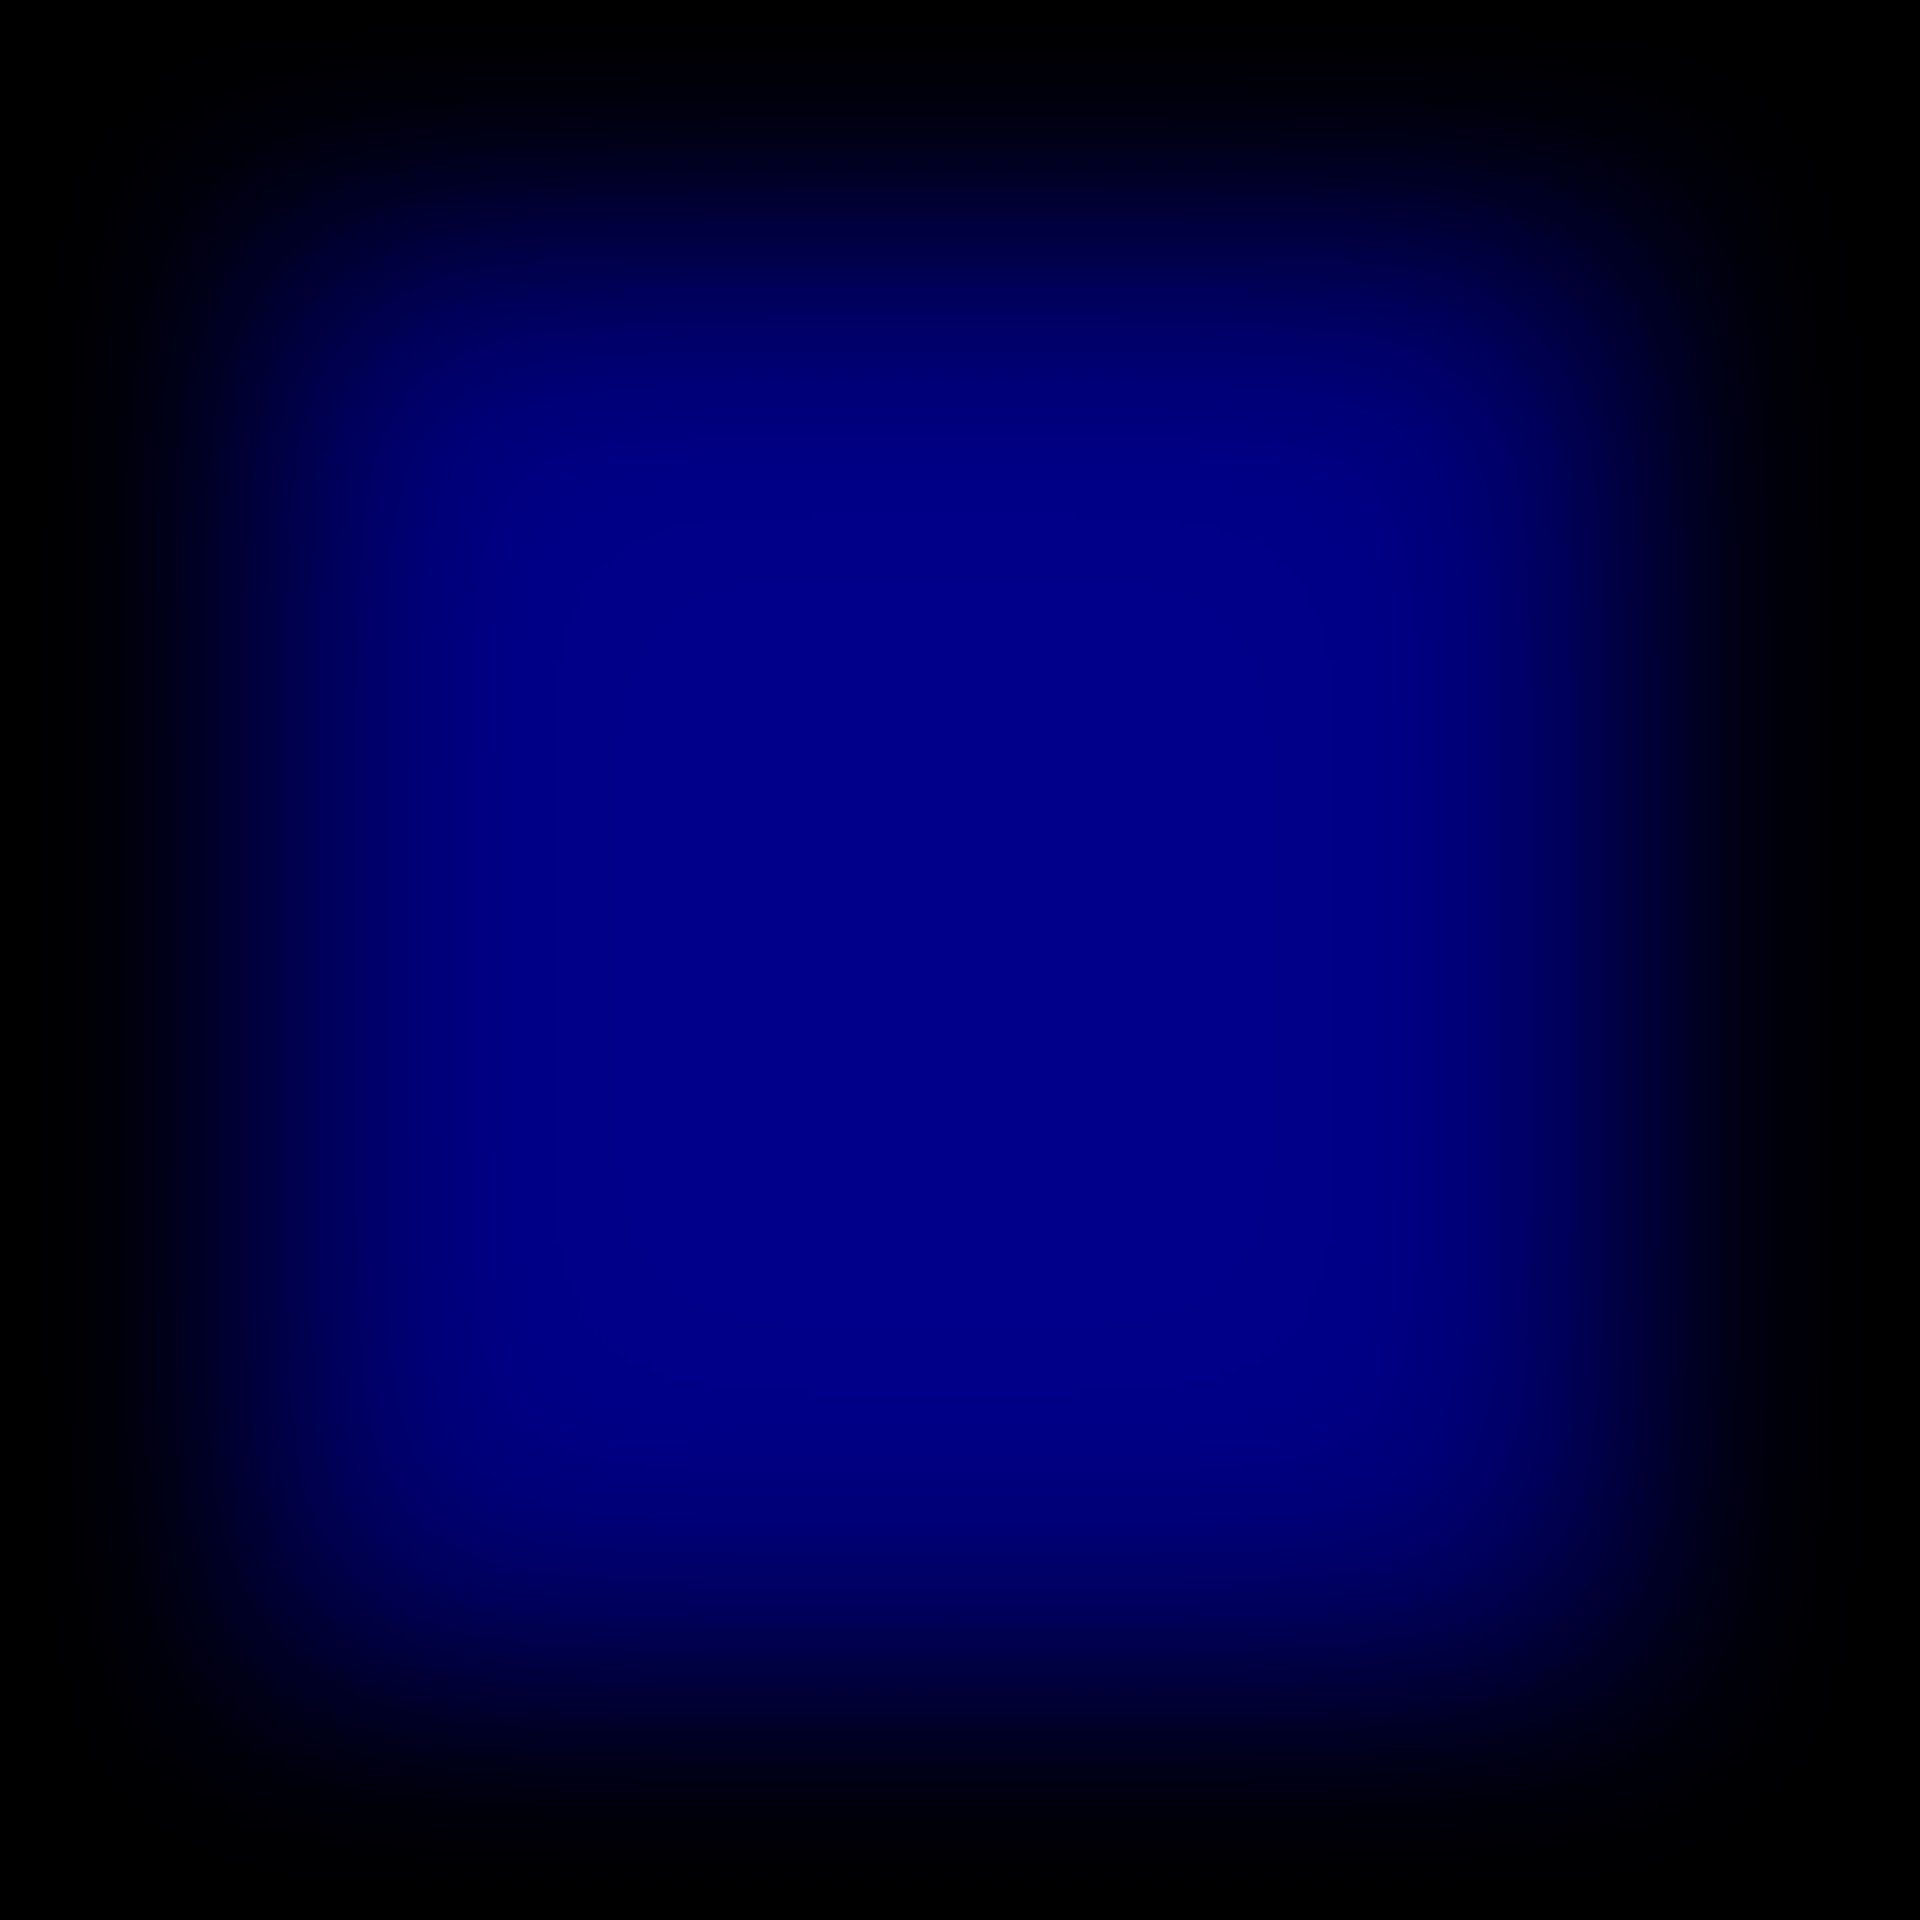 Download free photo of Dark,blue,background,gradient,abstract - from  